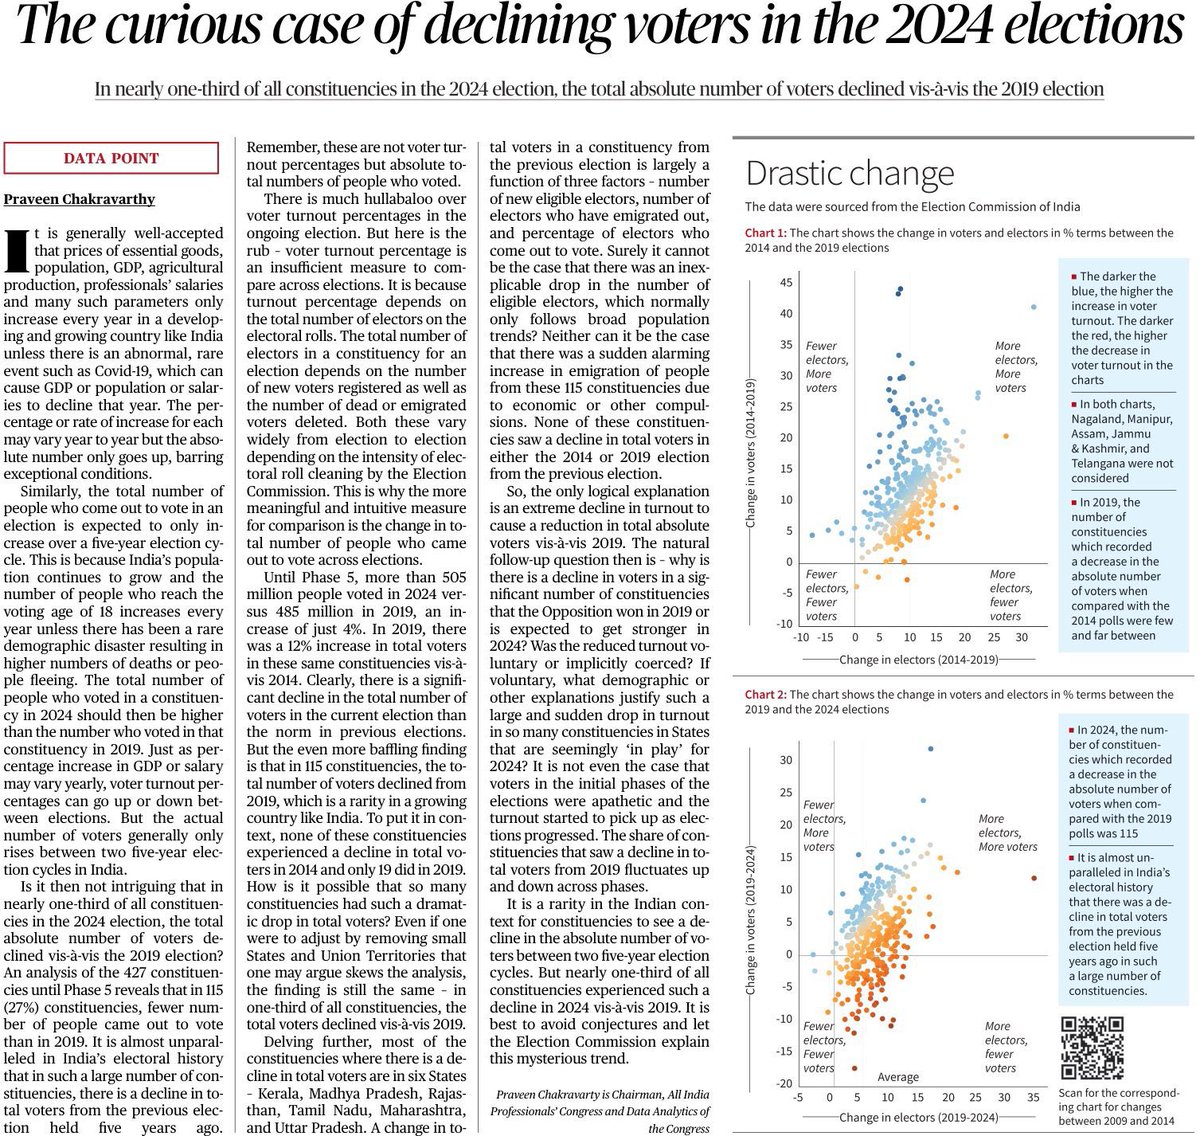 Column that caught my eye: Very alarming: in nearly one third of Lok Sabha constituencies in the country until phase 5, there is a DECLINE in TOTAL number of eligible voters. This has never happened before between a five year cycle to such an extent in recent elections . What